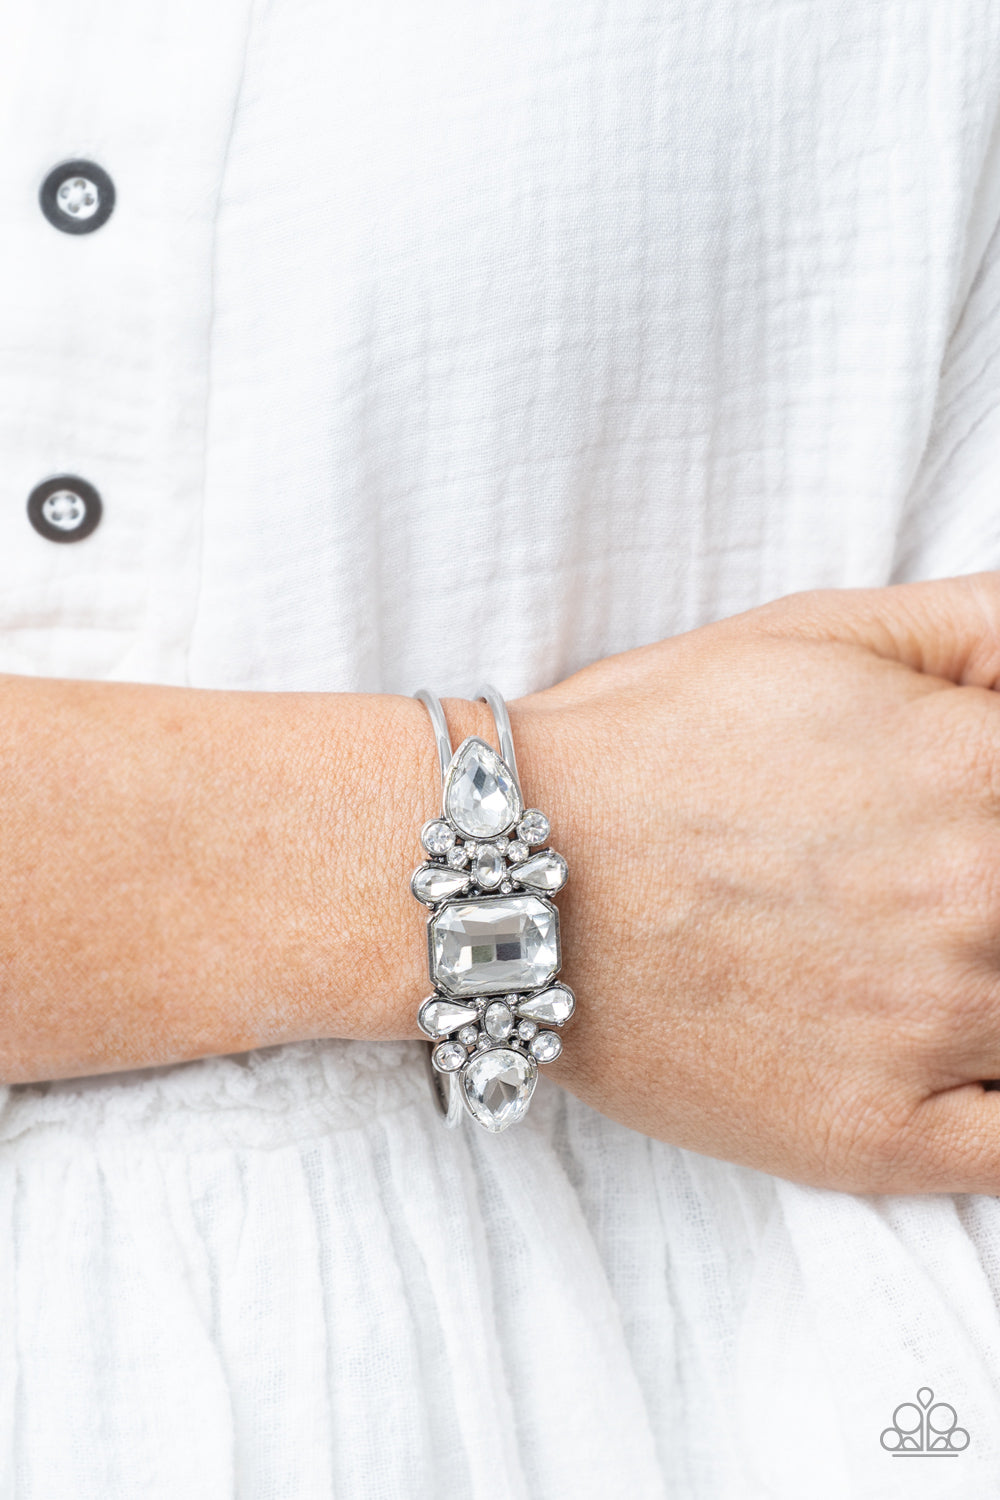 Call Me Old Fashioned- White and Silver Bracelet- Paparazzi Accessories